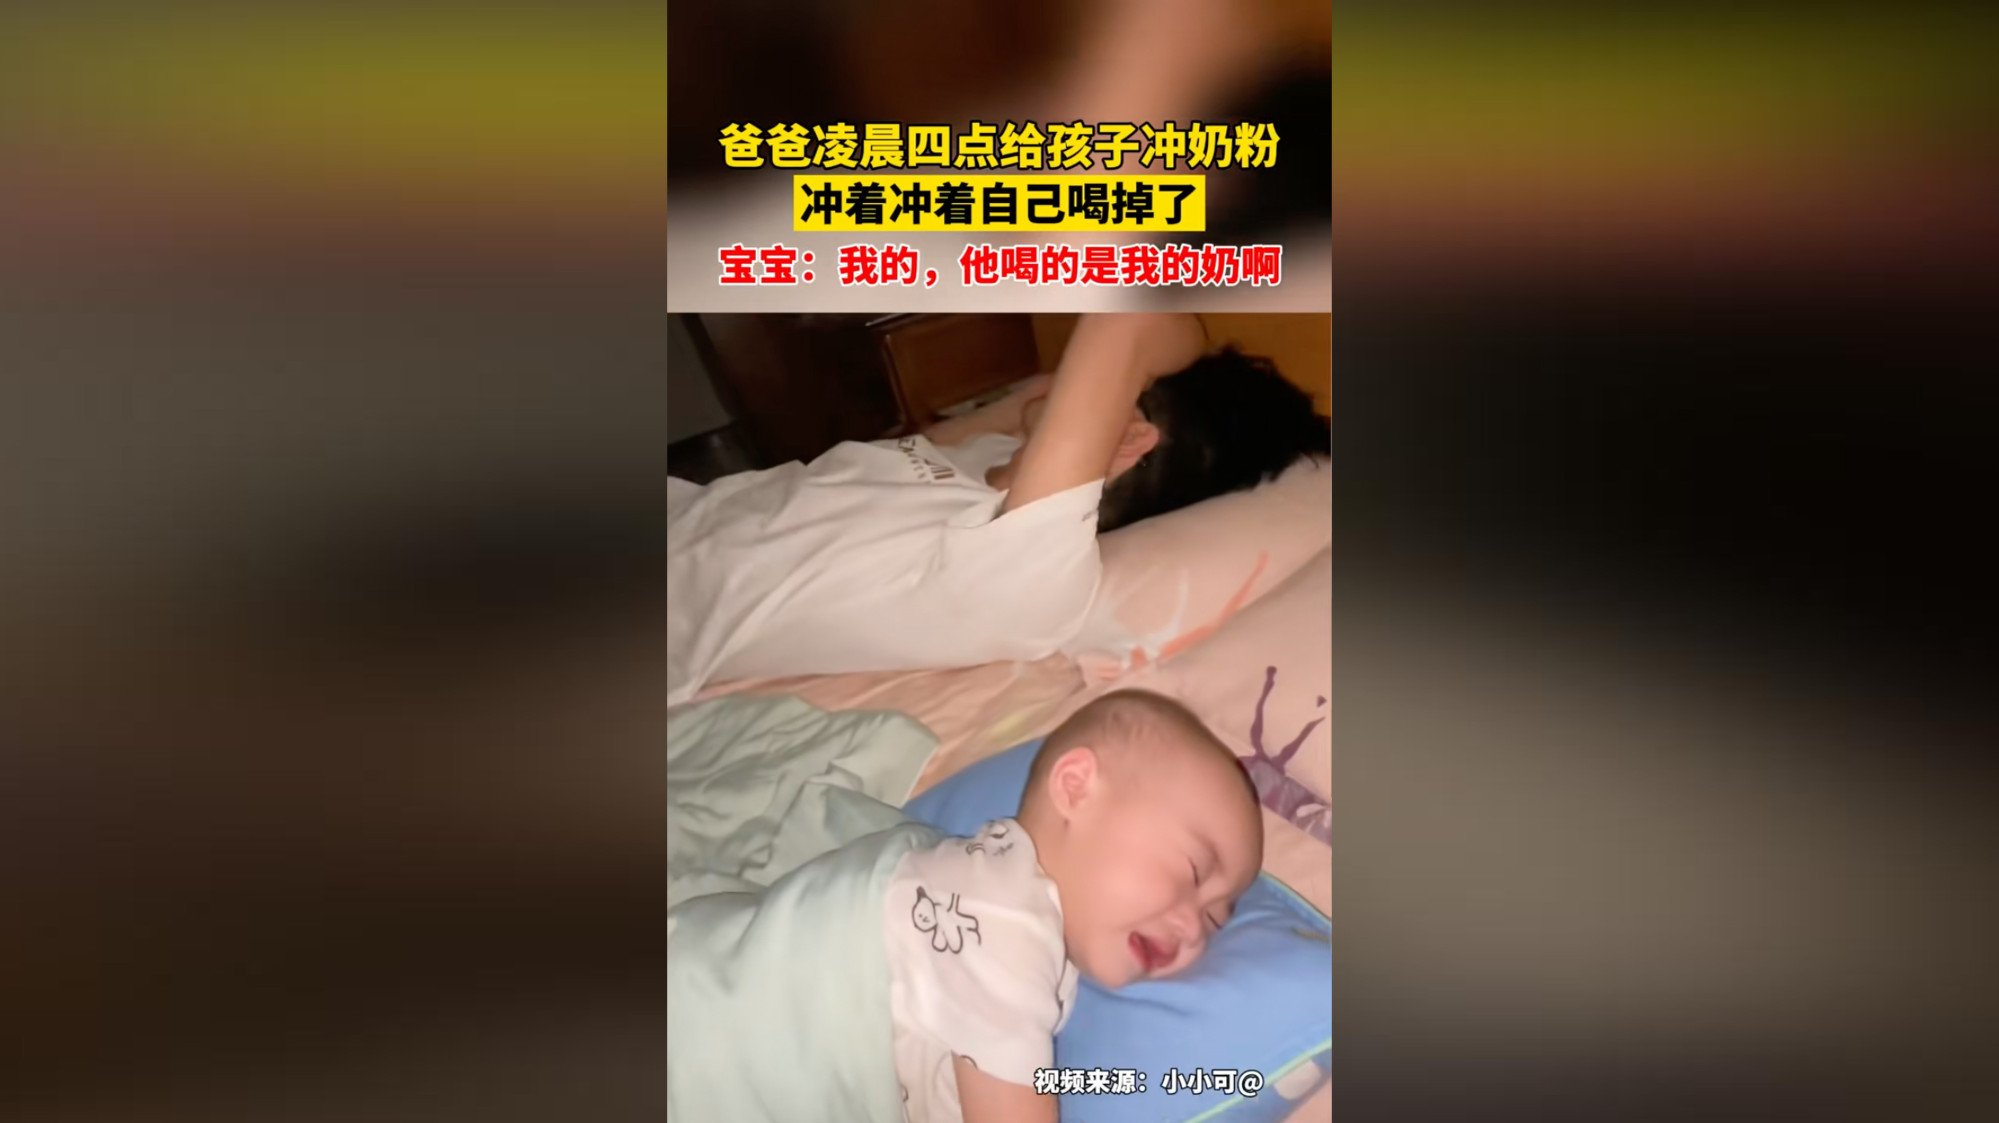 The man’s hungry baby daughter is seen crying in the video after he returns to bed from drinking her milk. Photo: Douyin